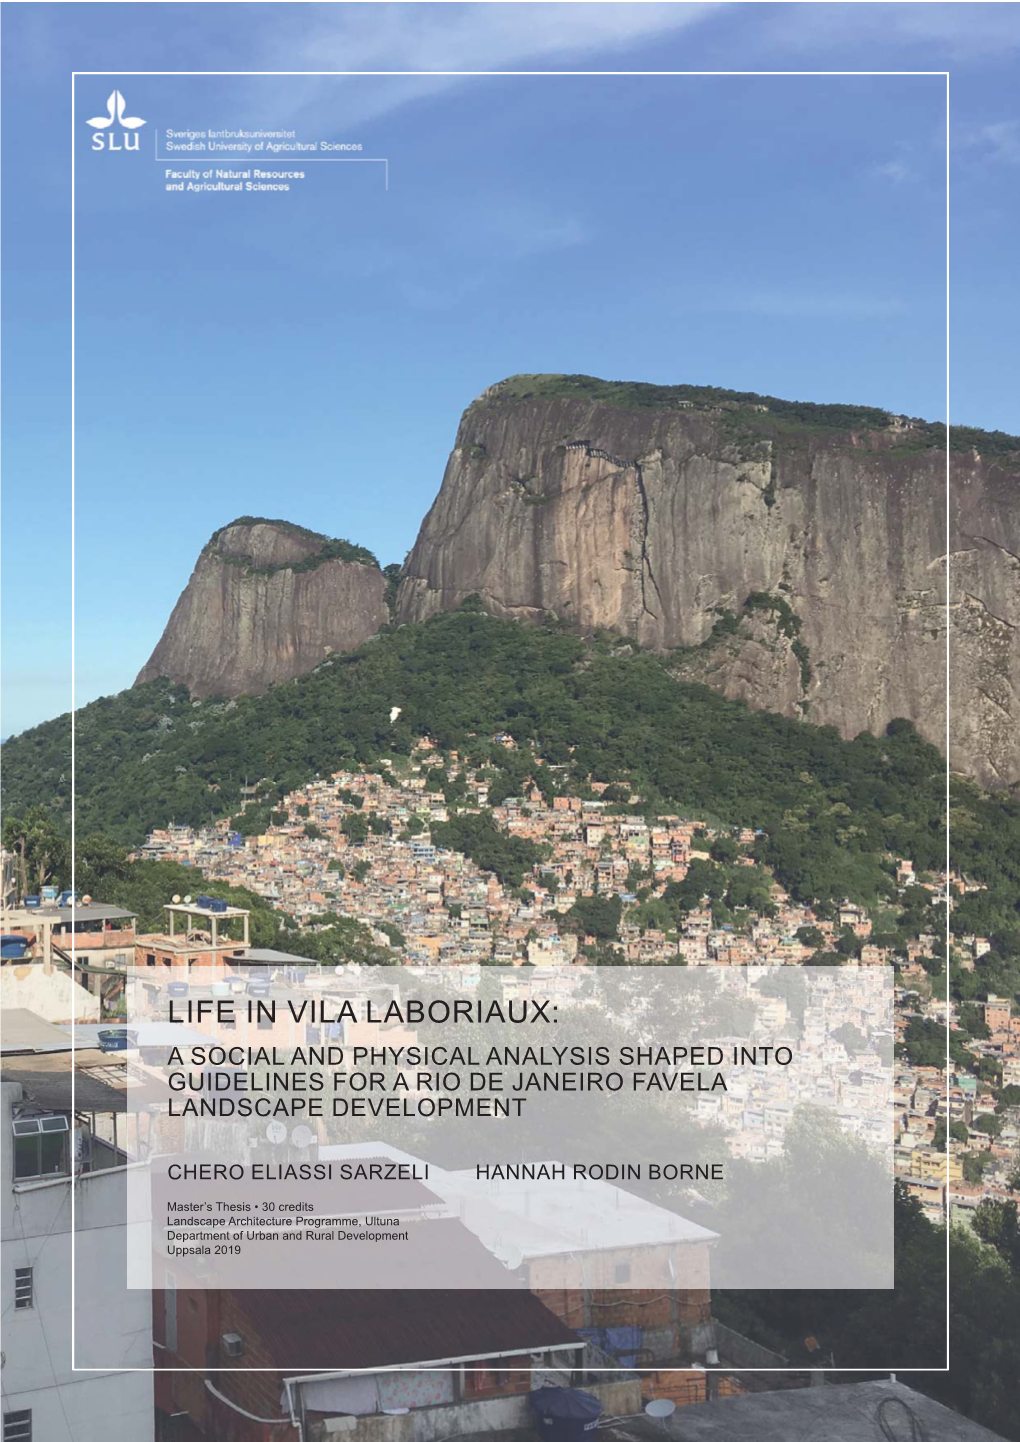 Life in Vila Laboriaux: a Social and Physical Analysis Shaped Into Guidelines for a Rio De Janeiro Favela Landscape Development